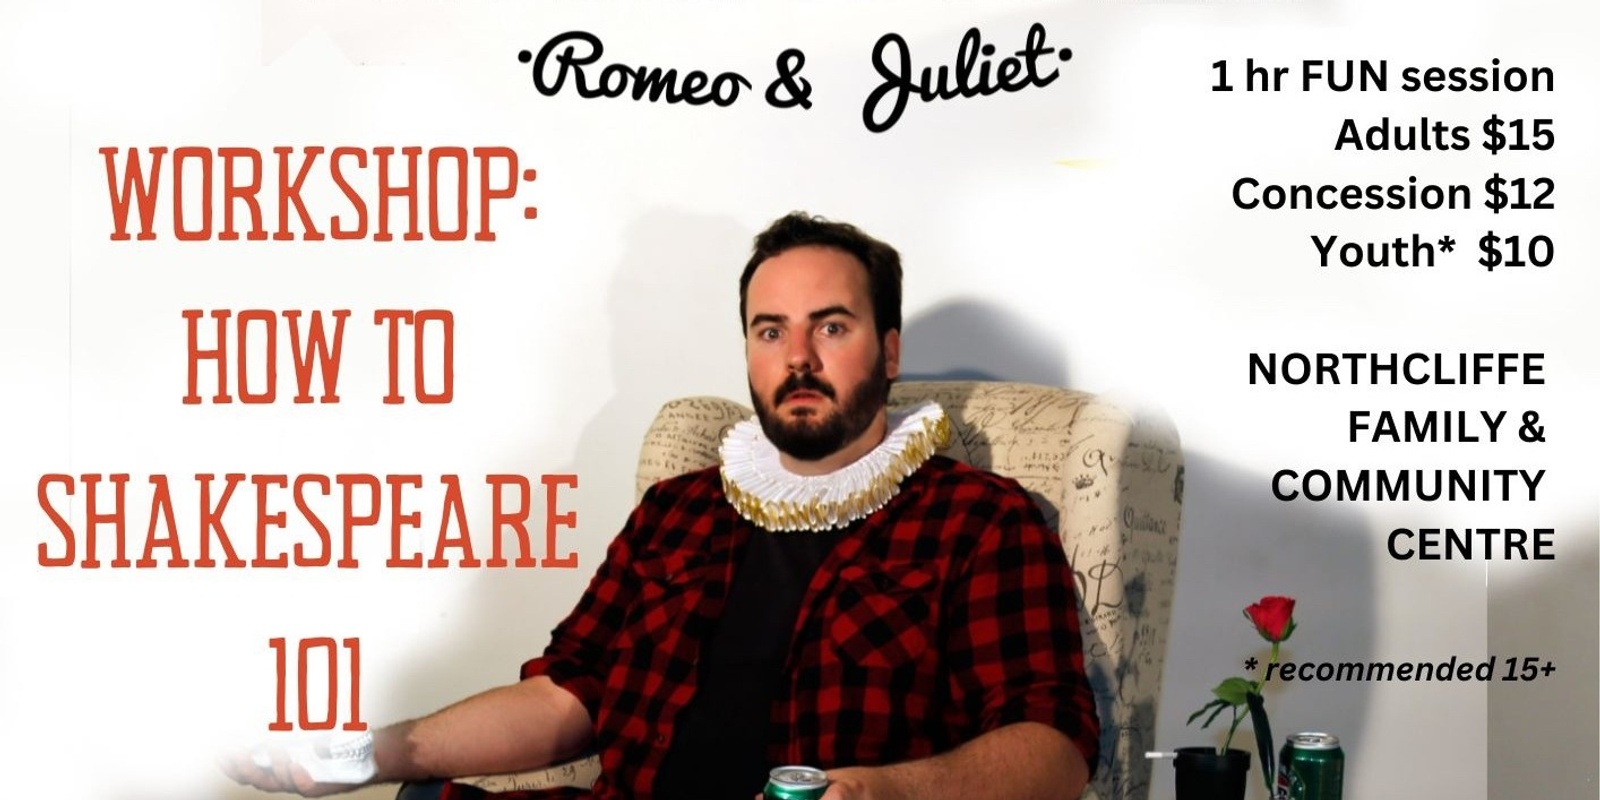 Banner image for How to Shakespeare 101 (Theatre workshop)